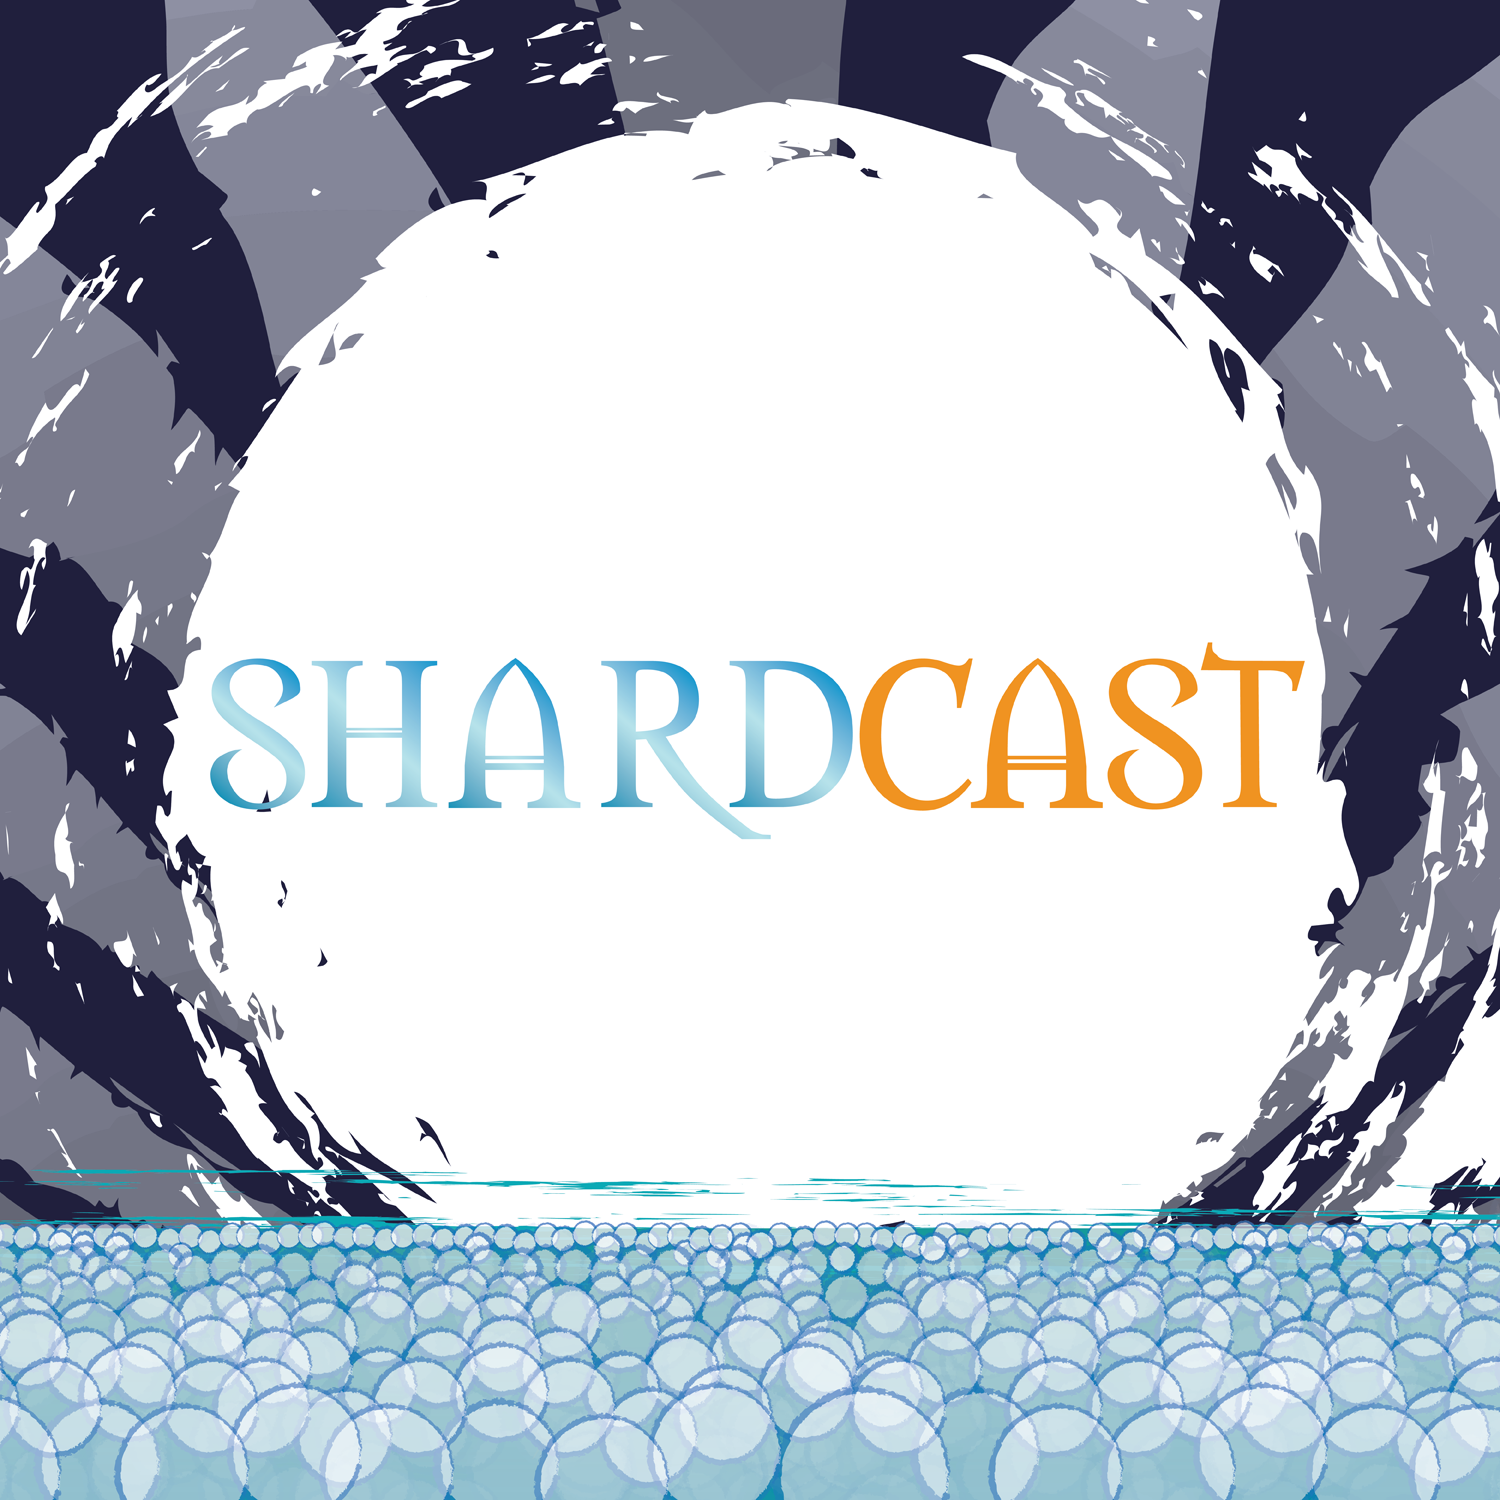 More information about "Shardcast: Southern Scadrians"